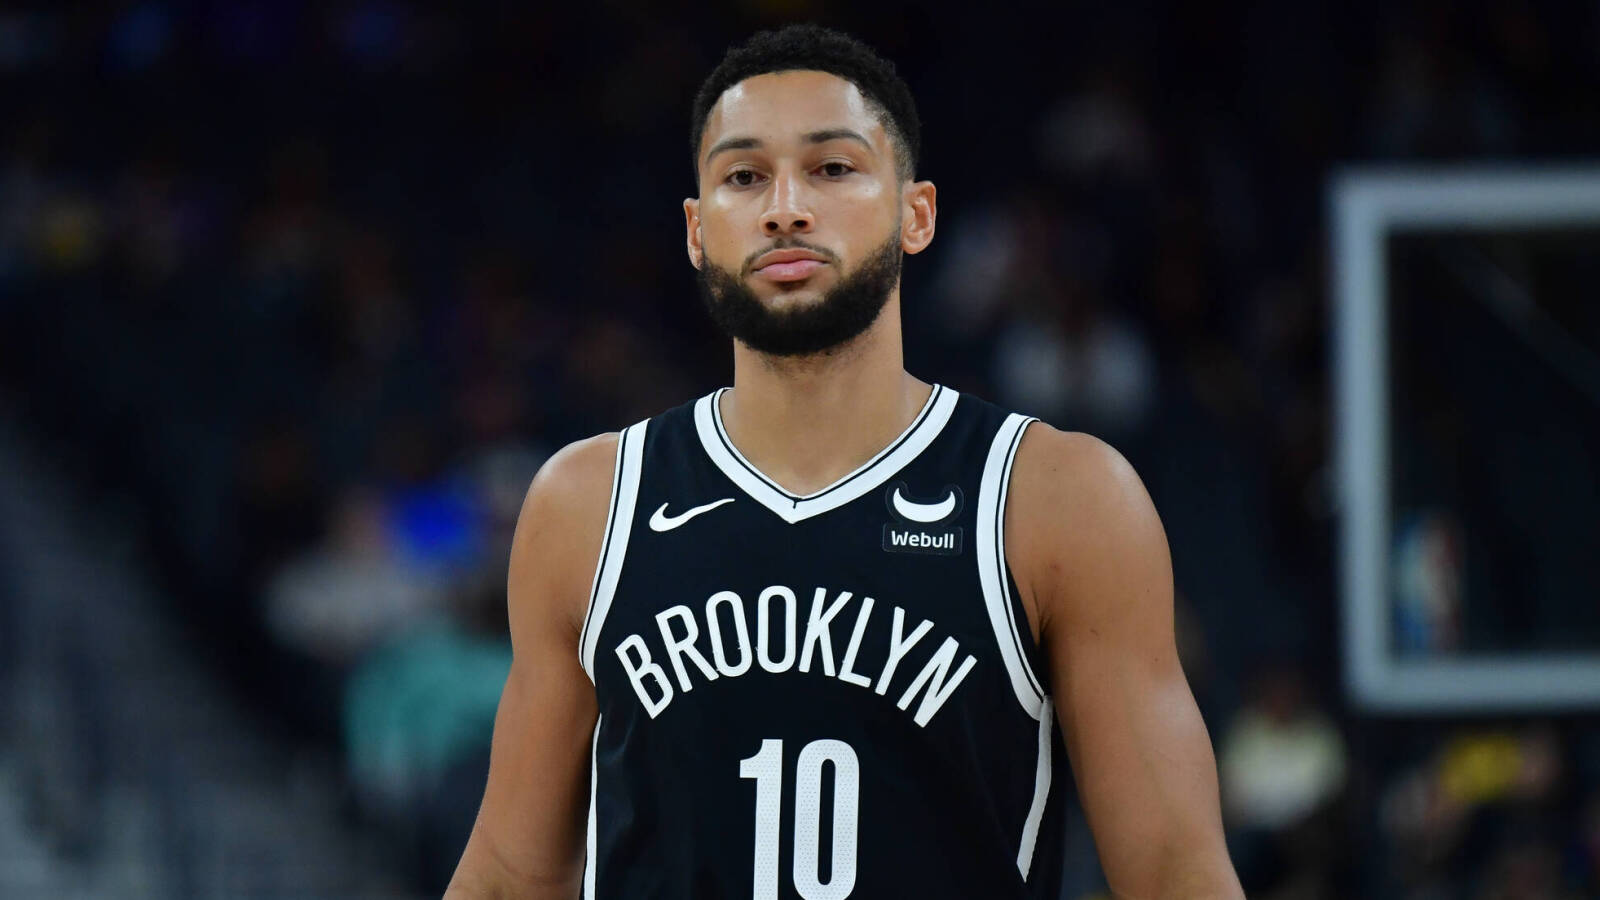 Watch: Ben Simmons fan shows off chest tattoo of Nets star